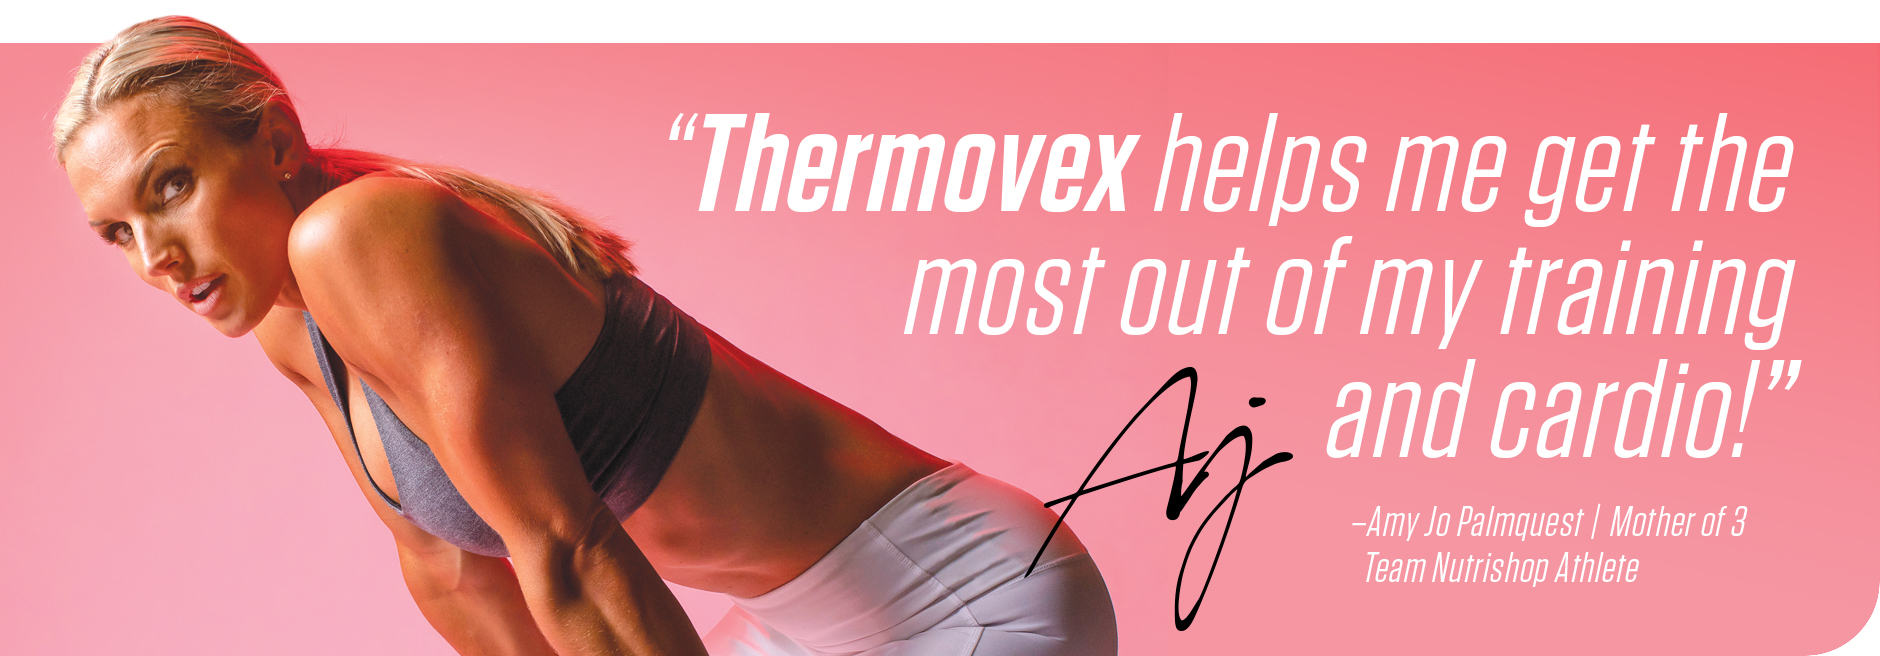 Thermovex helps me get the most out of my training and cardio! , quote by Amy Jo Palmquest , mother of 4 , team nutrishop athlete